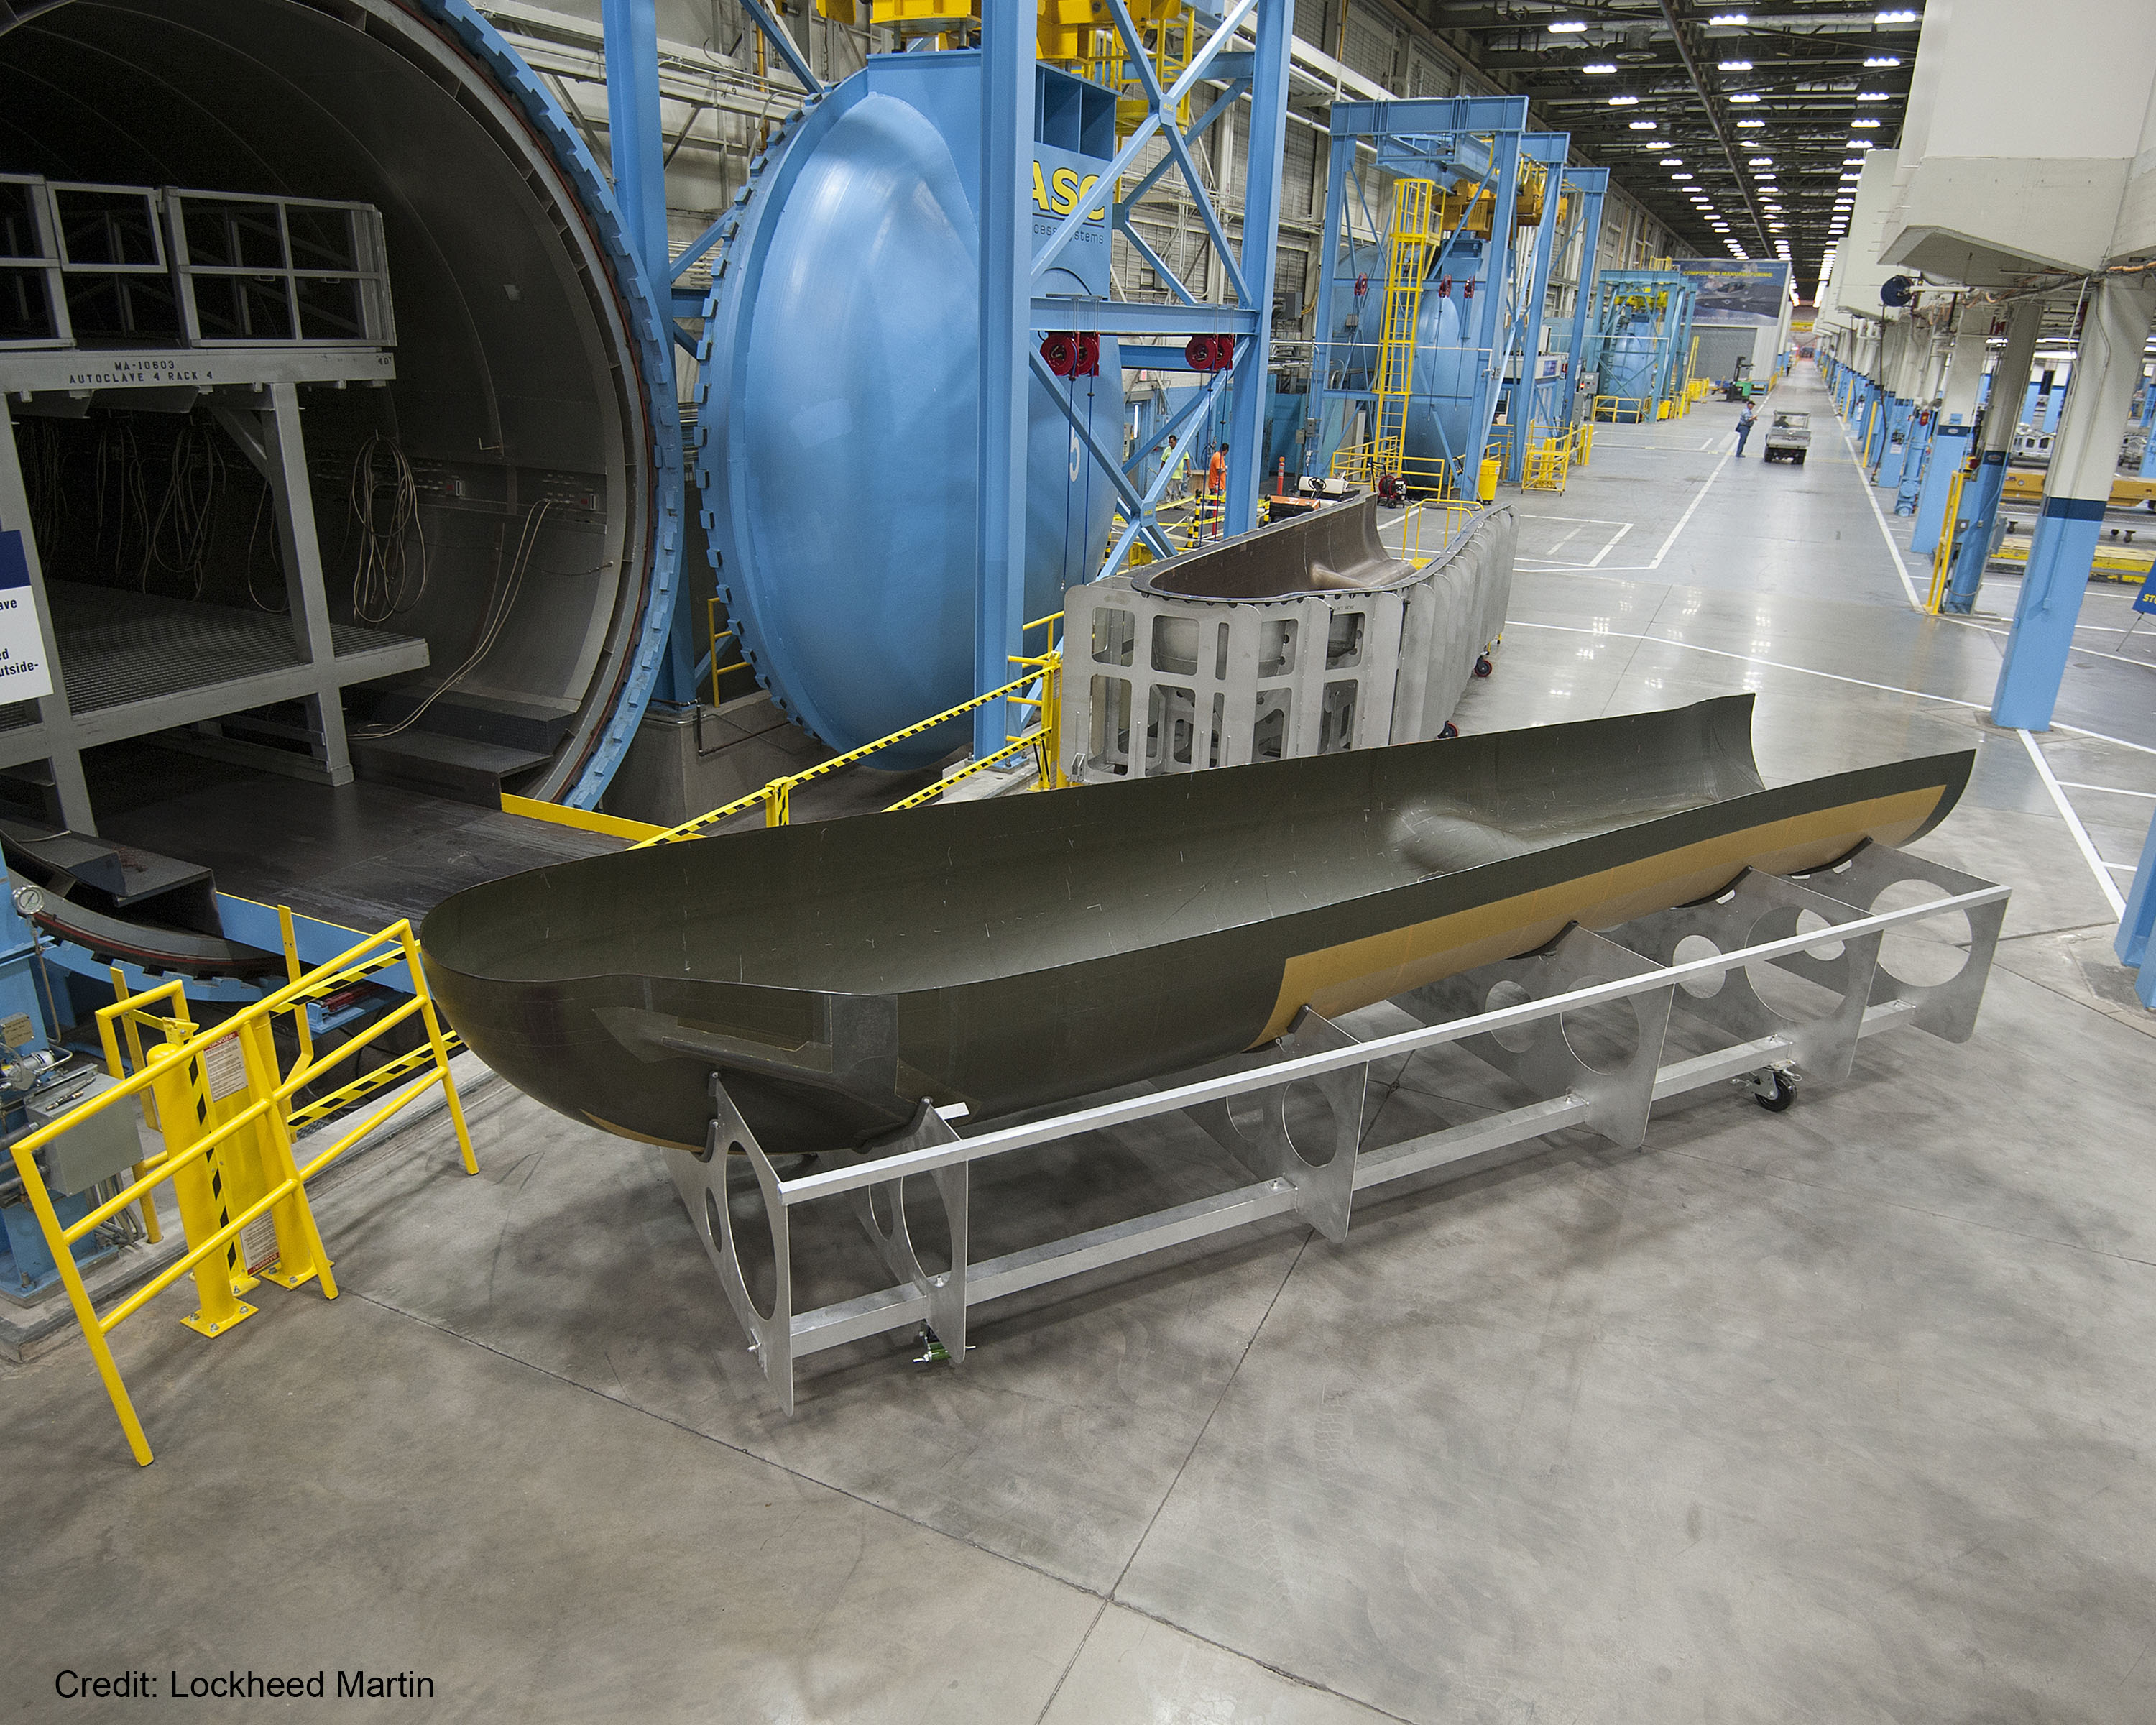 SNC's Dream Chaser® orbital structural airframe at Lockheed Martin in Ft. Worth. Credit: Lockheed Martin